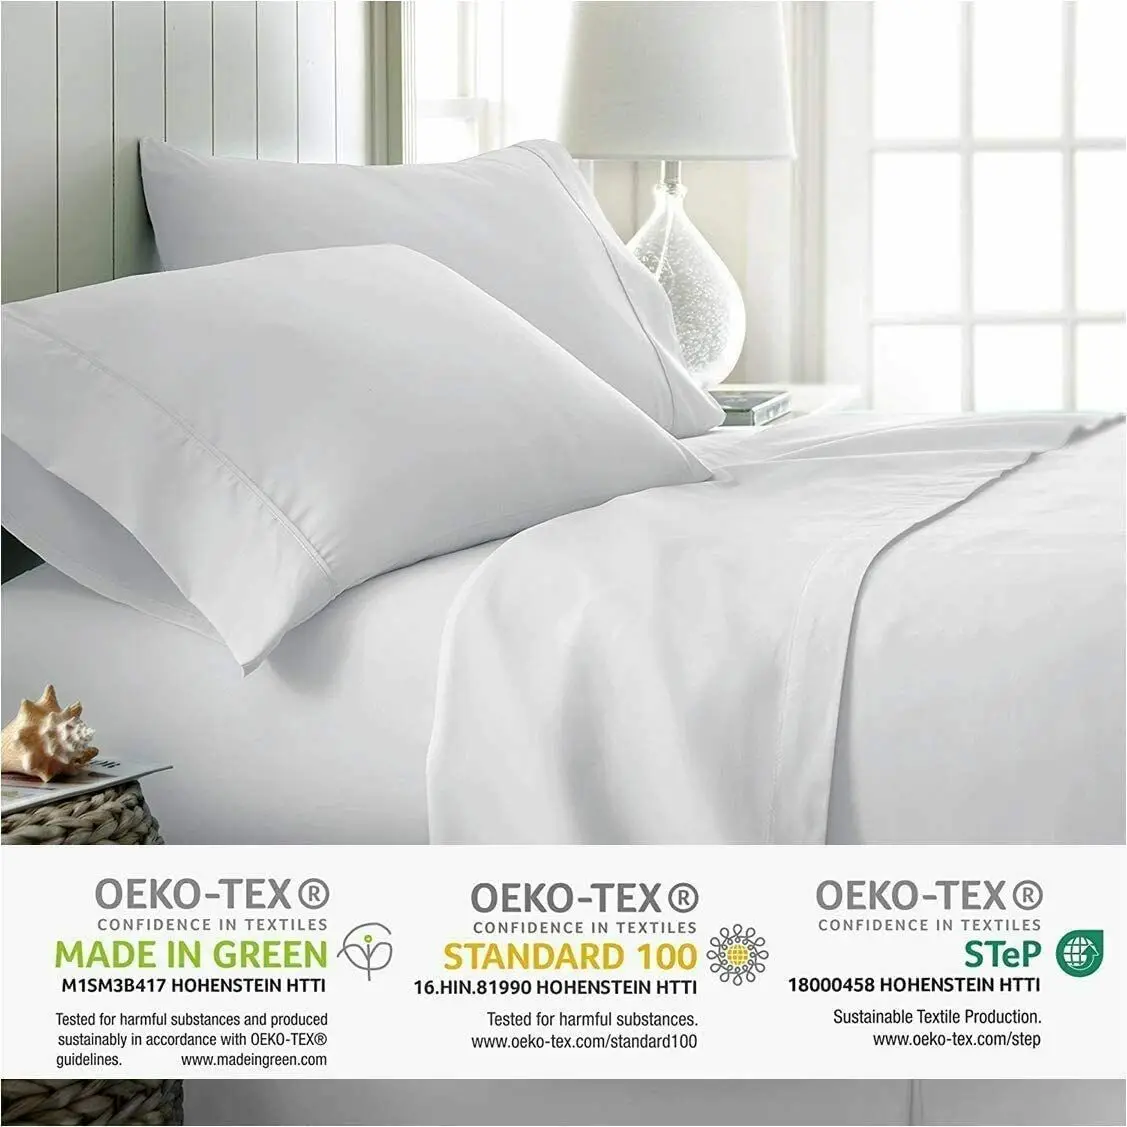 Bed Sheet Sets Deep Pocket Soft Flat Fitted Bedding set with Pillow cases Oeko-Tex certification.